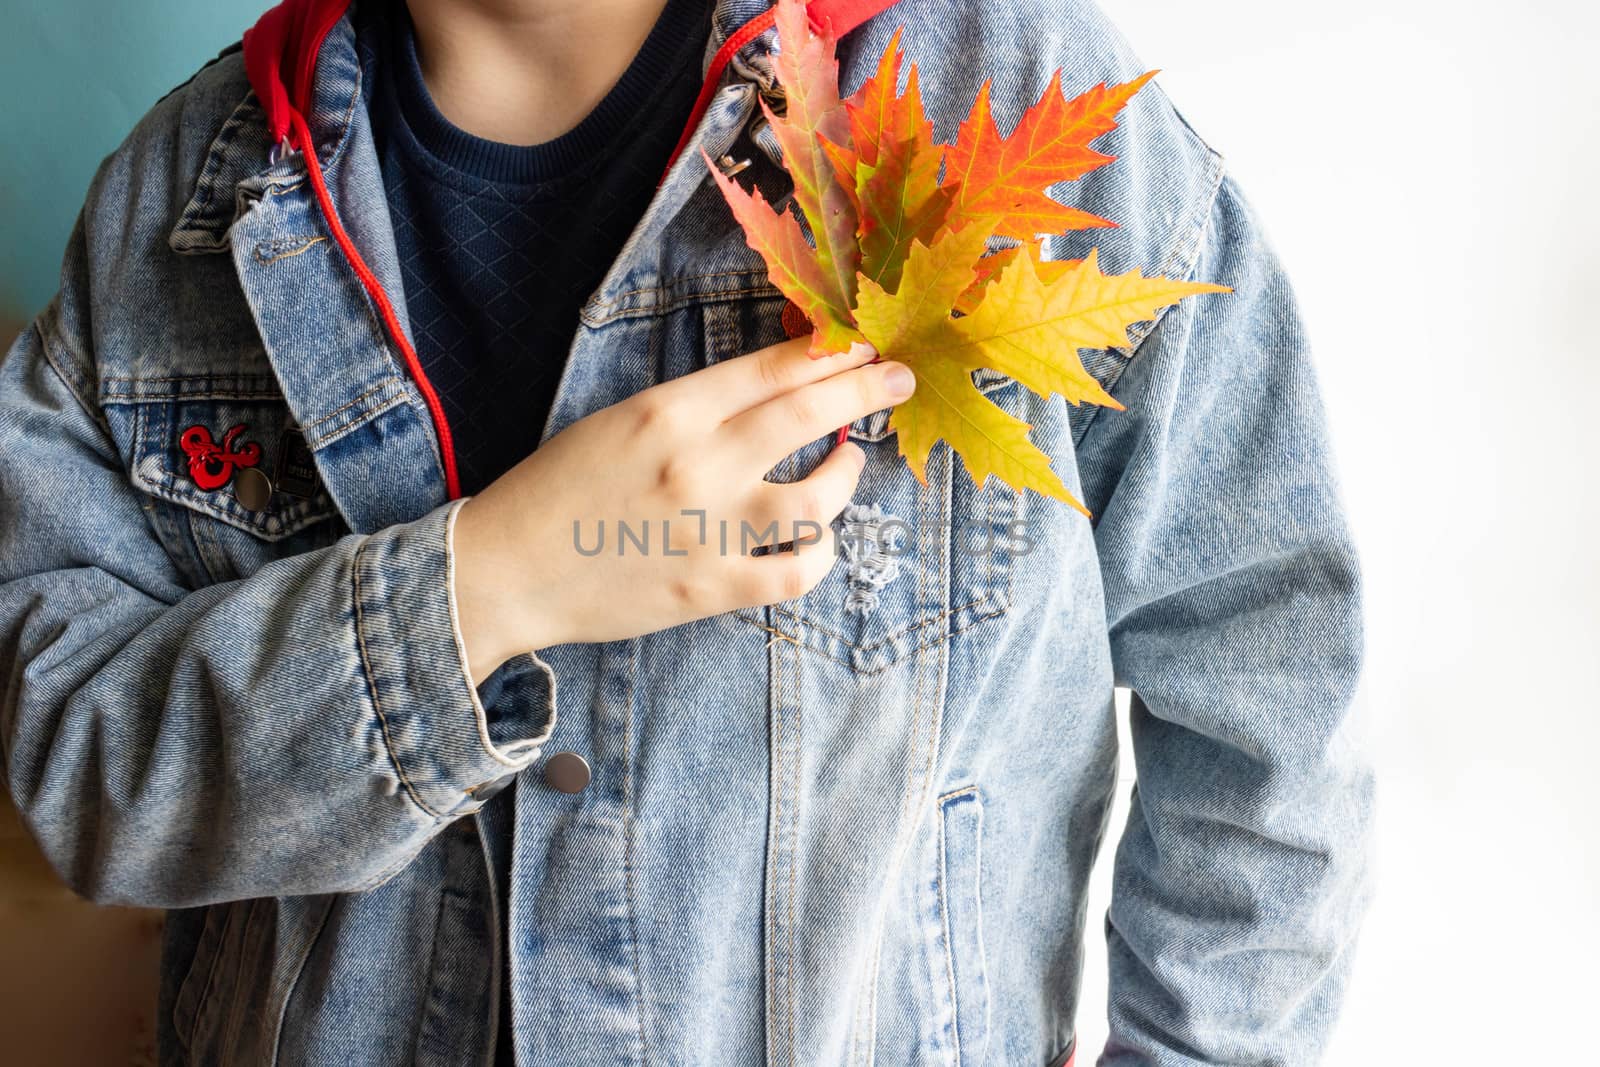 Beautiful multicolored autumn maple leaves in the hands of a woman in a denim jacket.